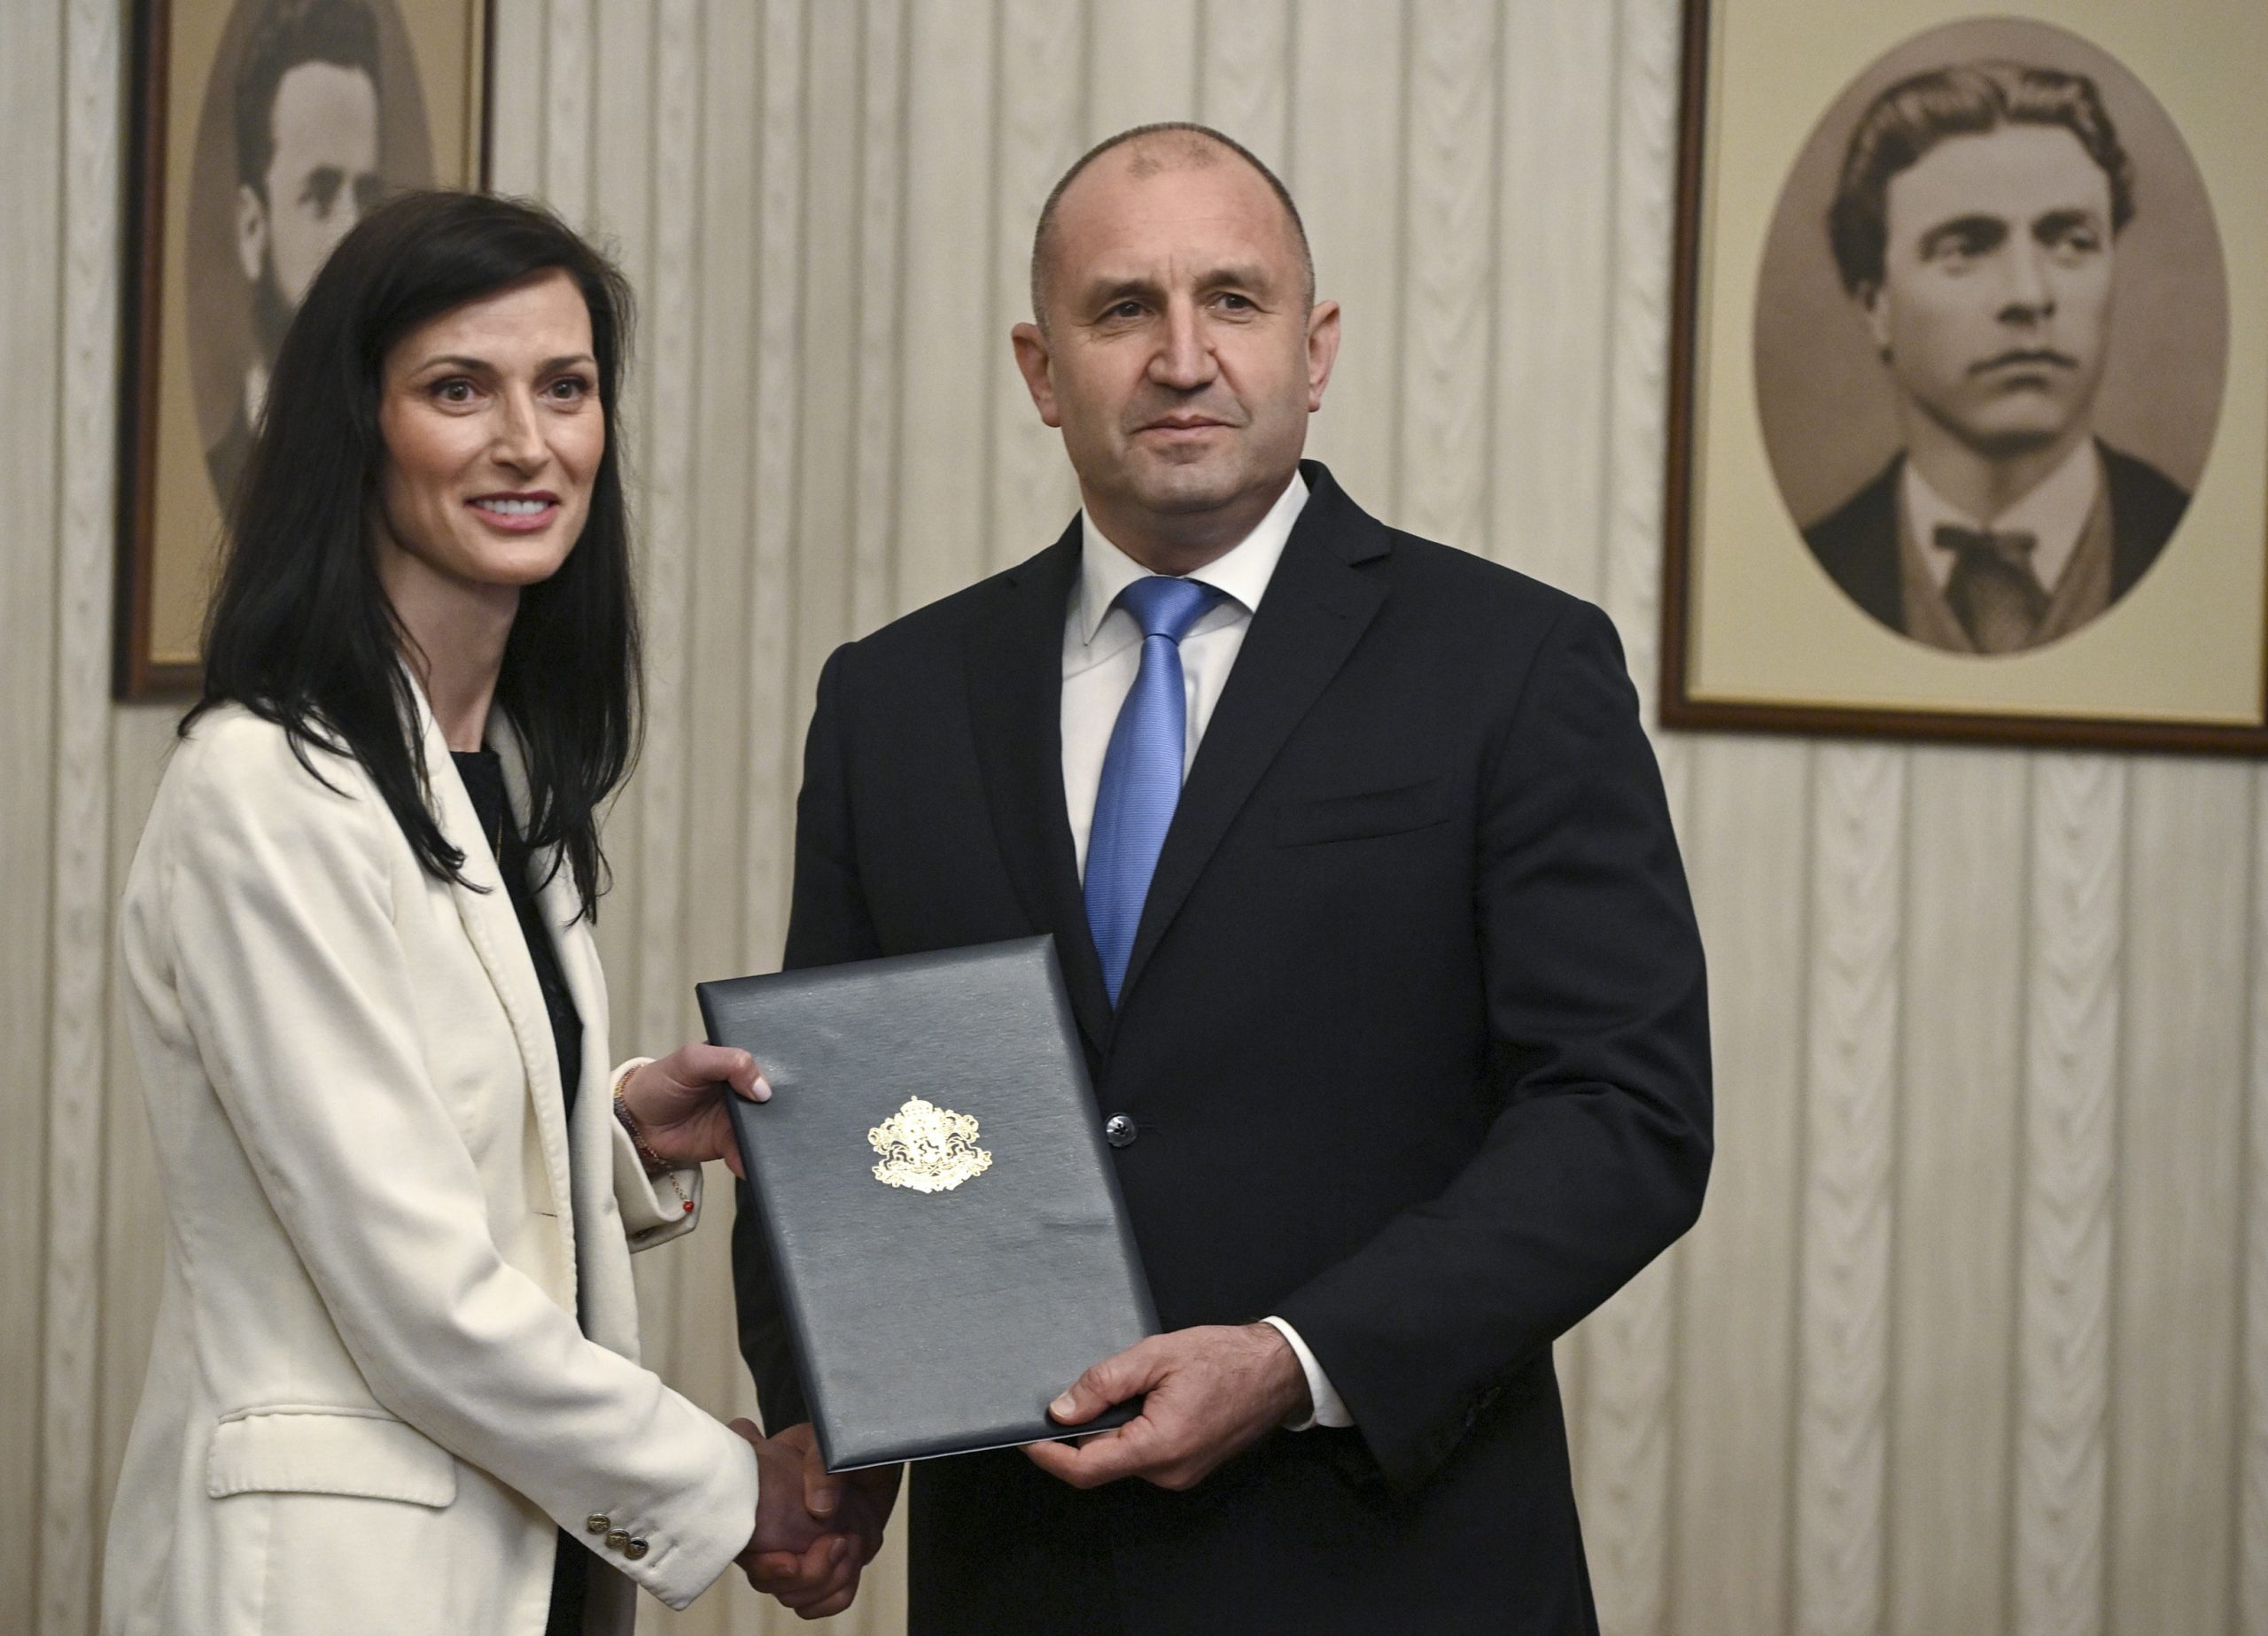 epa10629343 Bulgarian President Rumen Radev (R) and European Commissioner for Innovation, Research, Culture, Education and Youth Mariya Gabriel, Bulgaria's GERB-SDS party's candidate for prime minister, pose for photographers during an official ceremony of handing the mandate to form a new government in Sofia, Bulgaria, 15 May 2023. Talks about forming a government have been ongoing since Bulgaria's early parliamentary elections on 02 April.  EPA/VASSIL DONEV